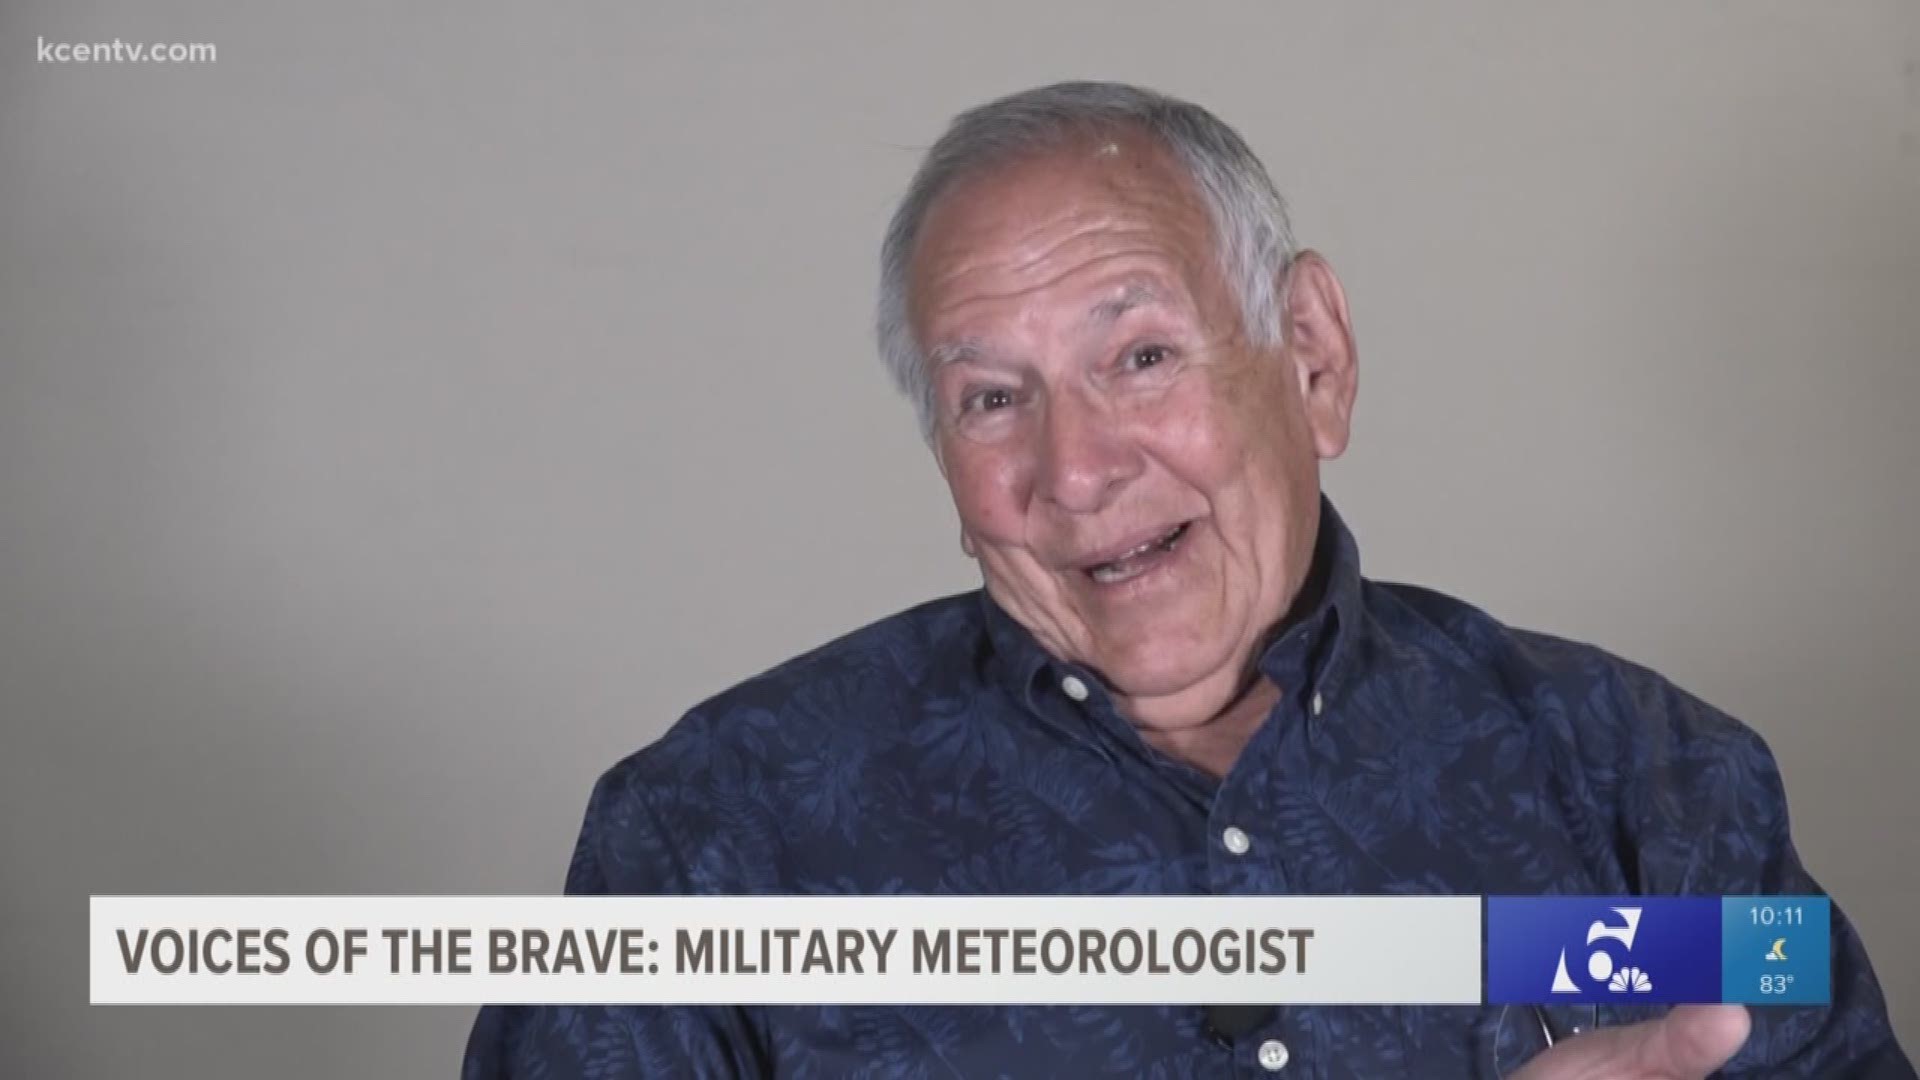 From Missouri farm boy to military meteorologist, Bill Hecke has lived quite a life.